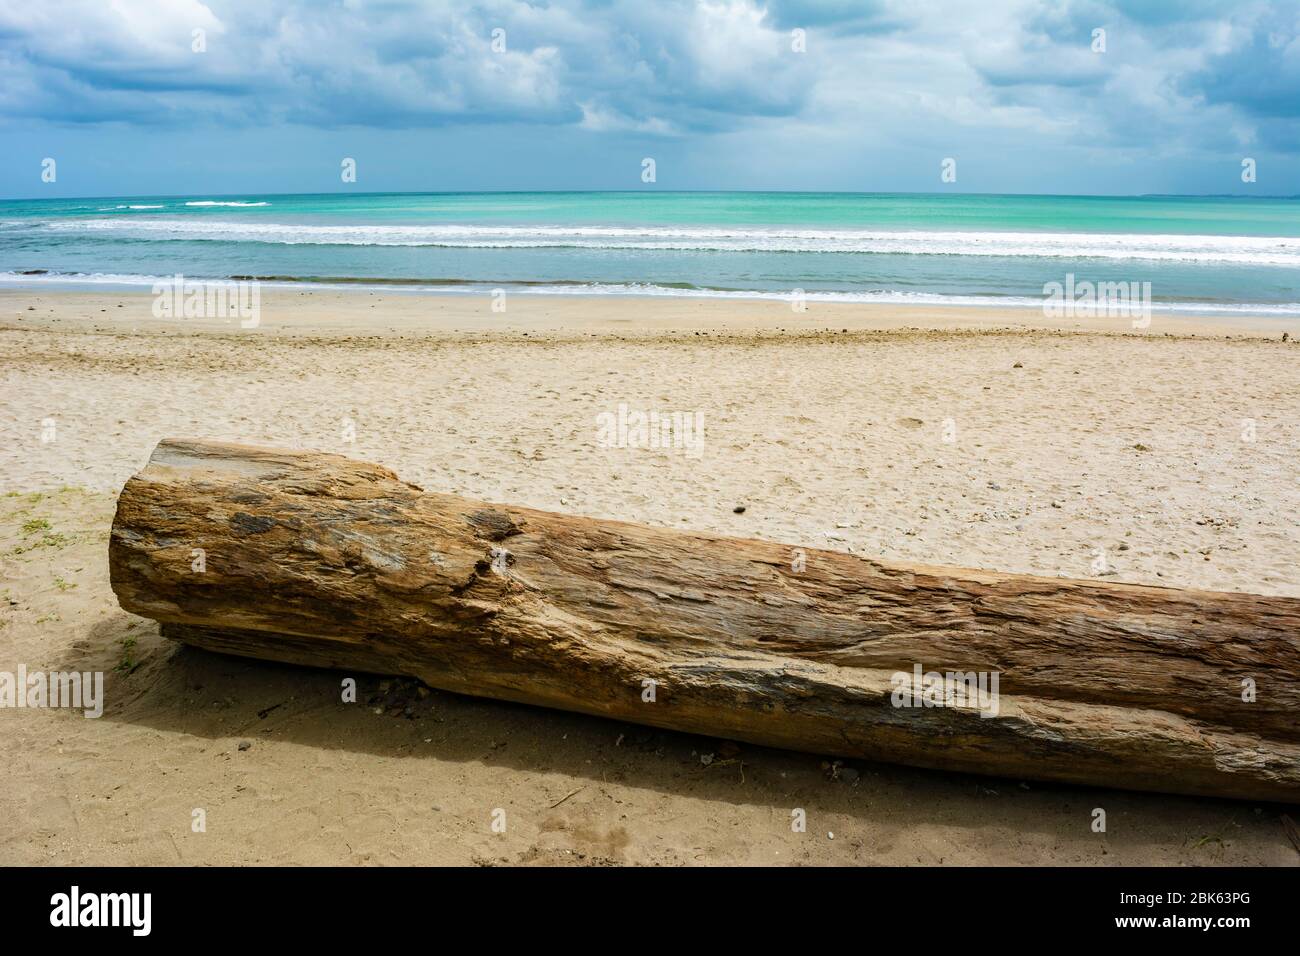 Empty or deserted Kuta Beach in Badung regency, Bali, Indonesia. Government has been urging people to stay at home to reduce the covid-19 pandemic. Stock Photo